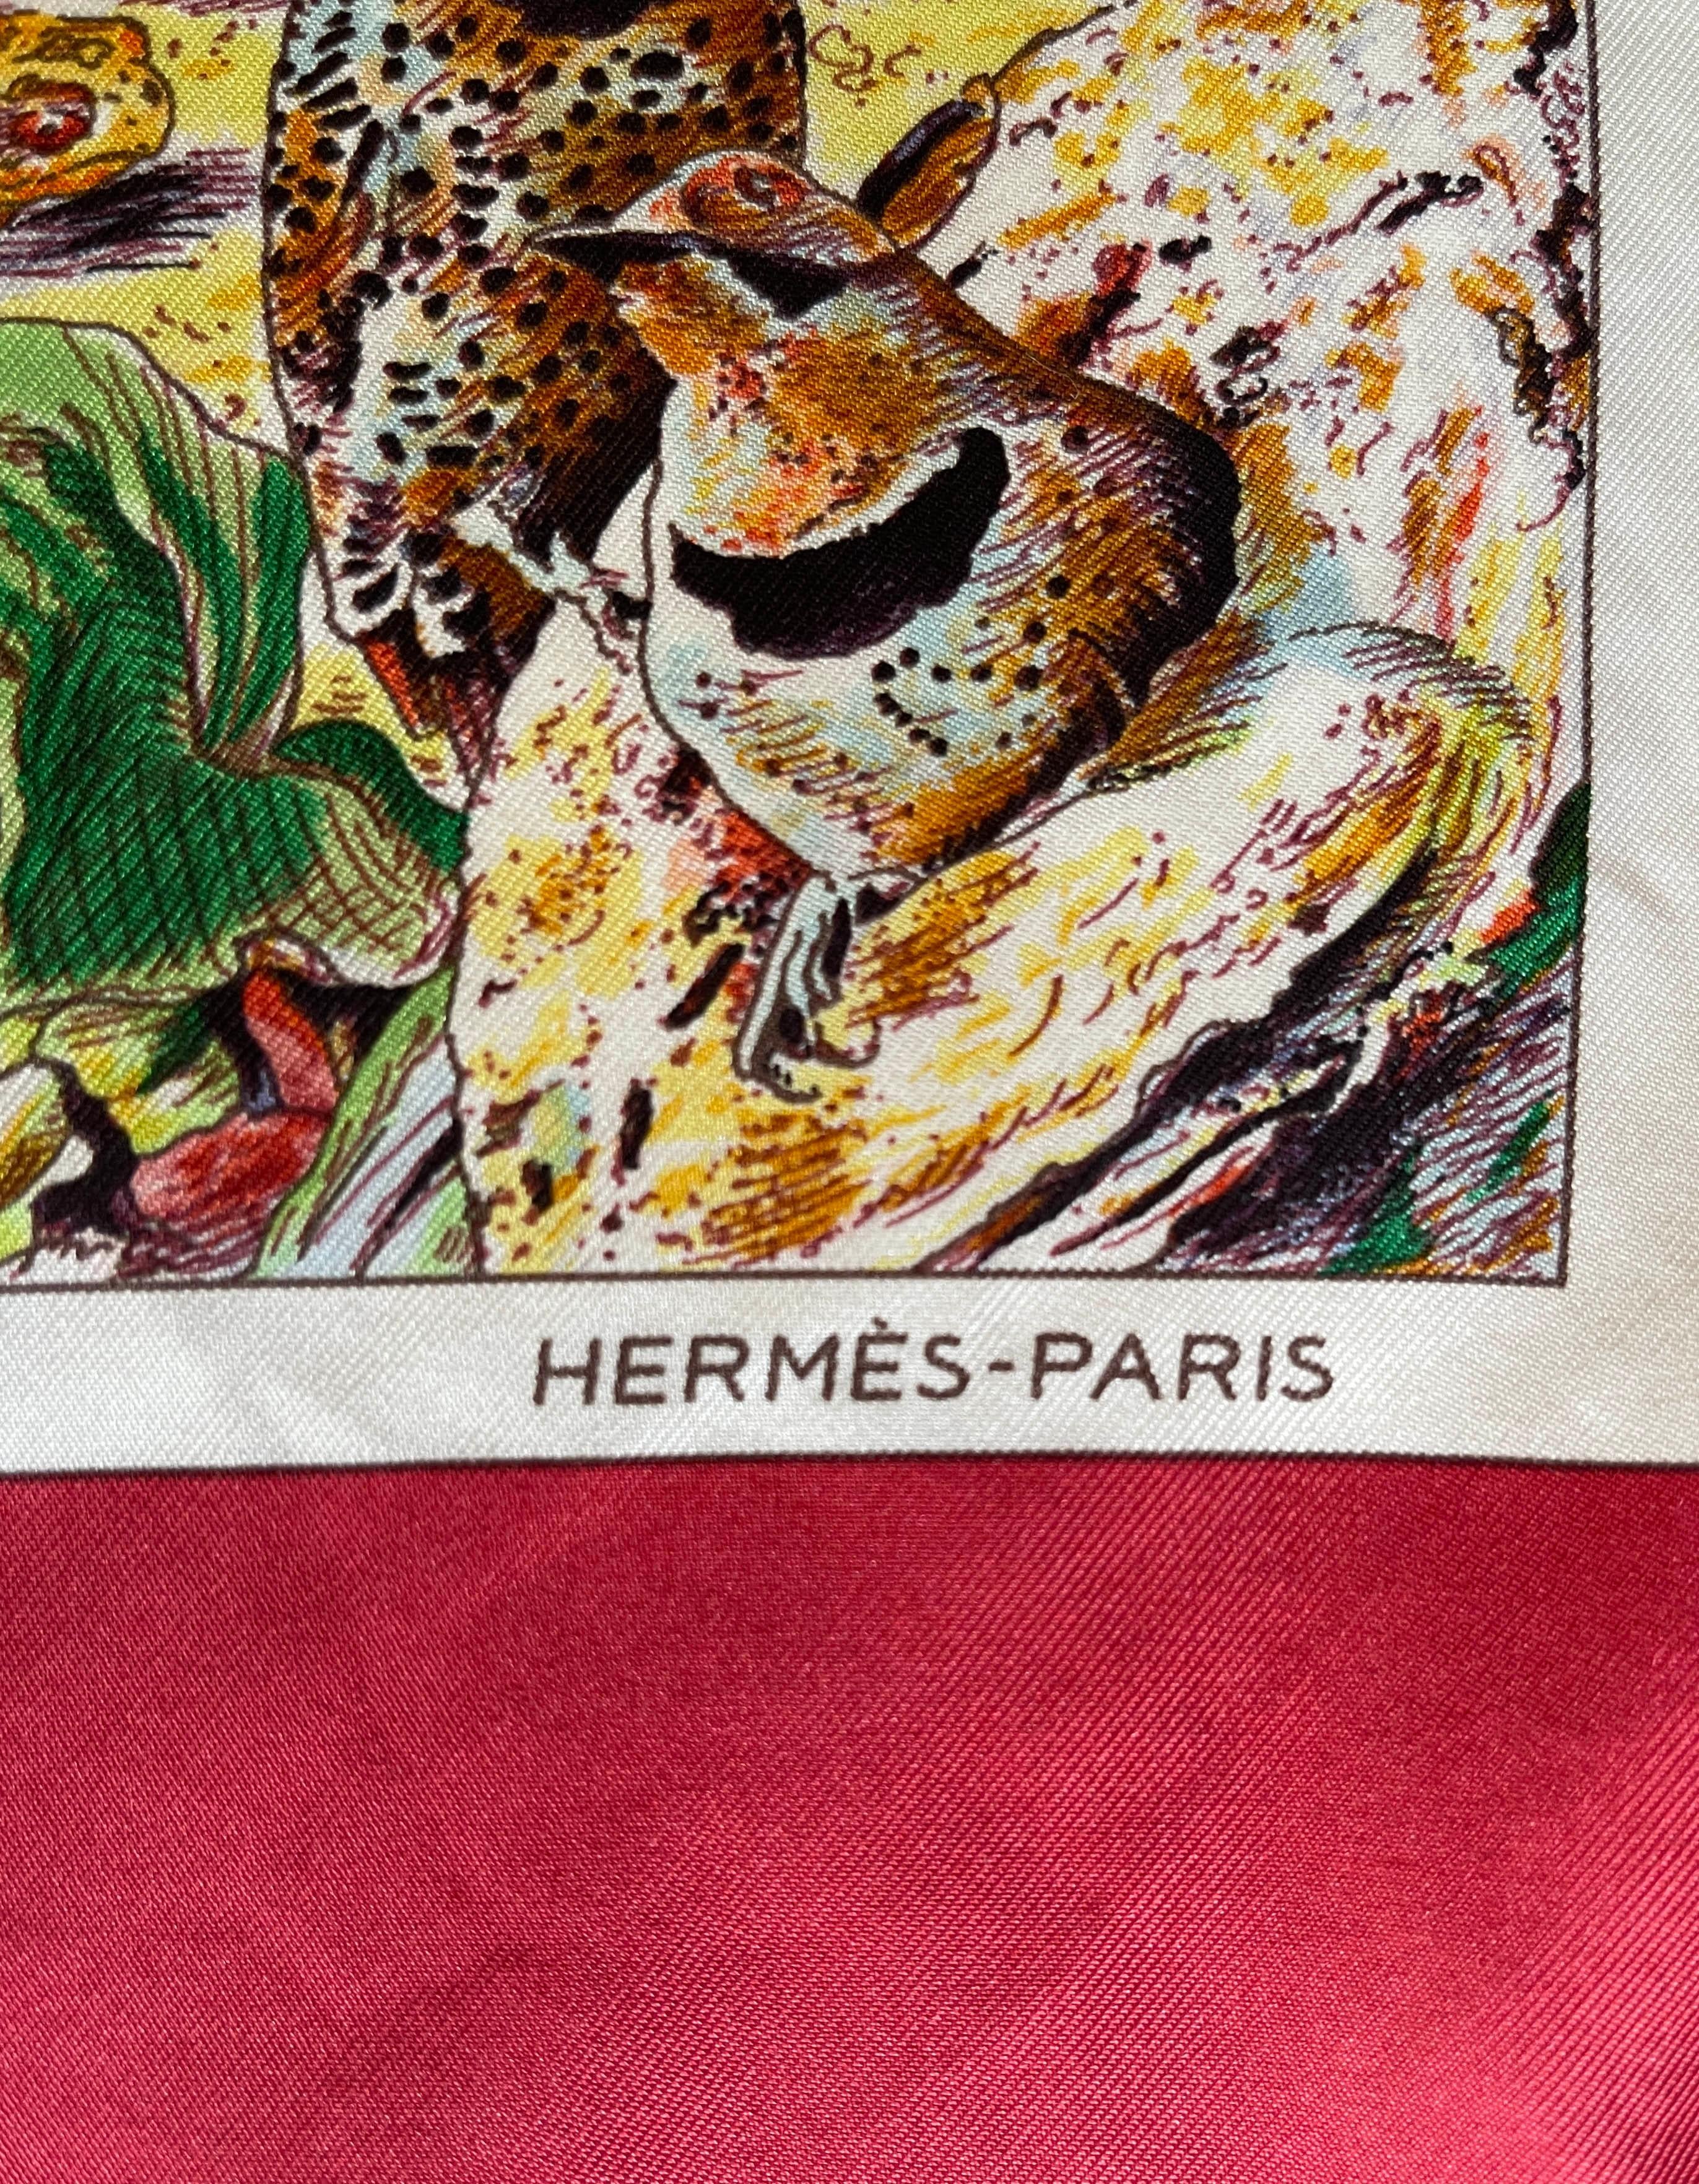 Hermes COLLECTORS Madison Avenue Celebrating 10 years 90cm Silk Scarf  
Made In: France
Color: Red/multi
Materials: 100% silk
Overall Condition: Excellent.  Light fading to edges from cleaning  
Includes: Hermes box

Measurements:
34